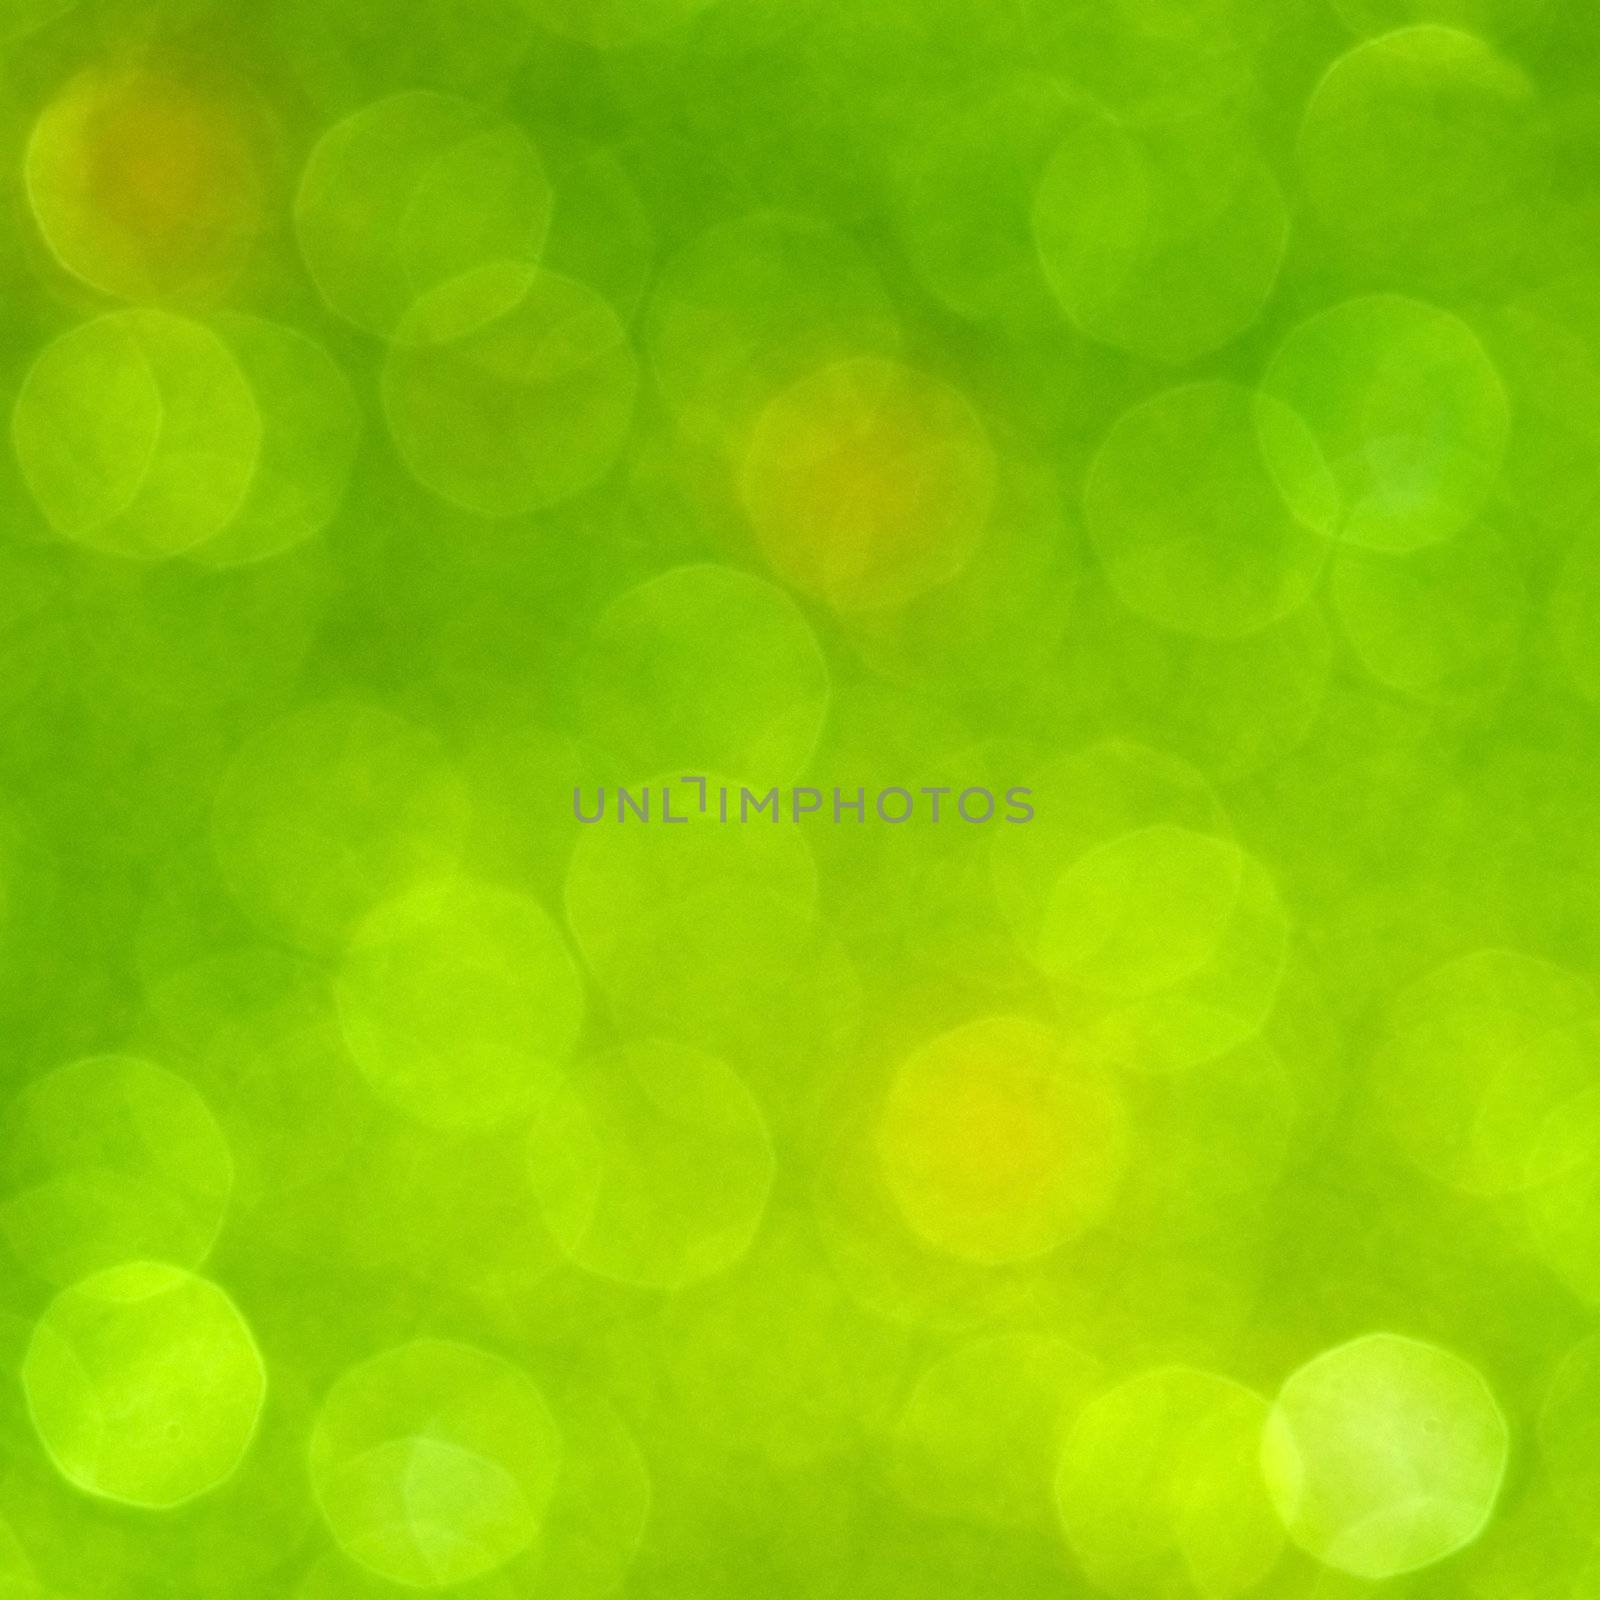 Sparkling blur abstract background by pzaxe